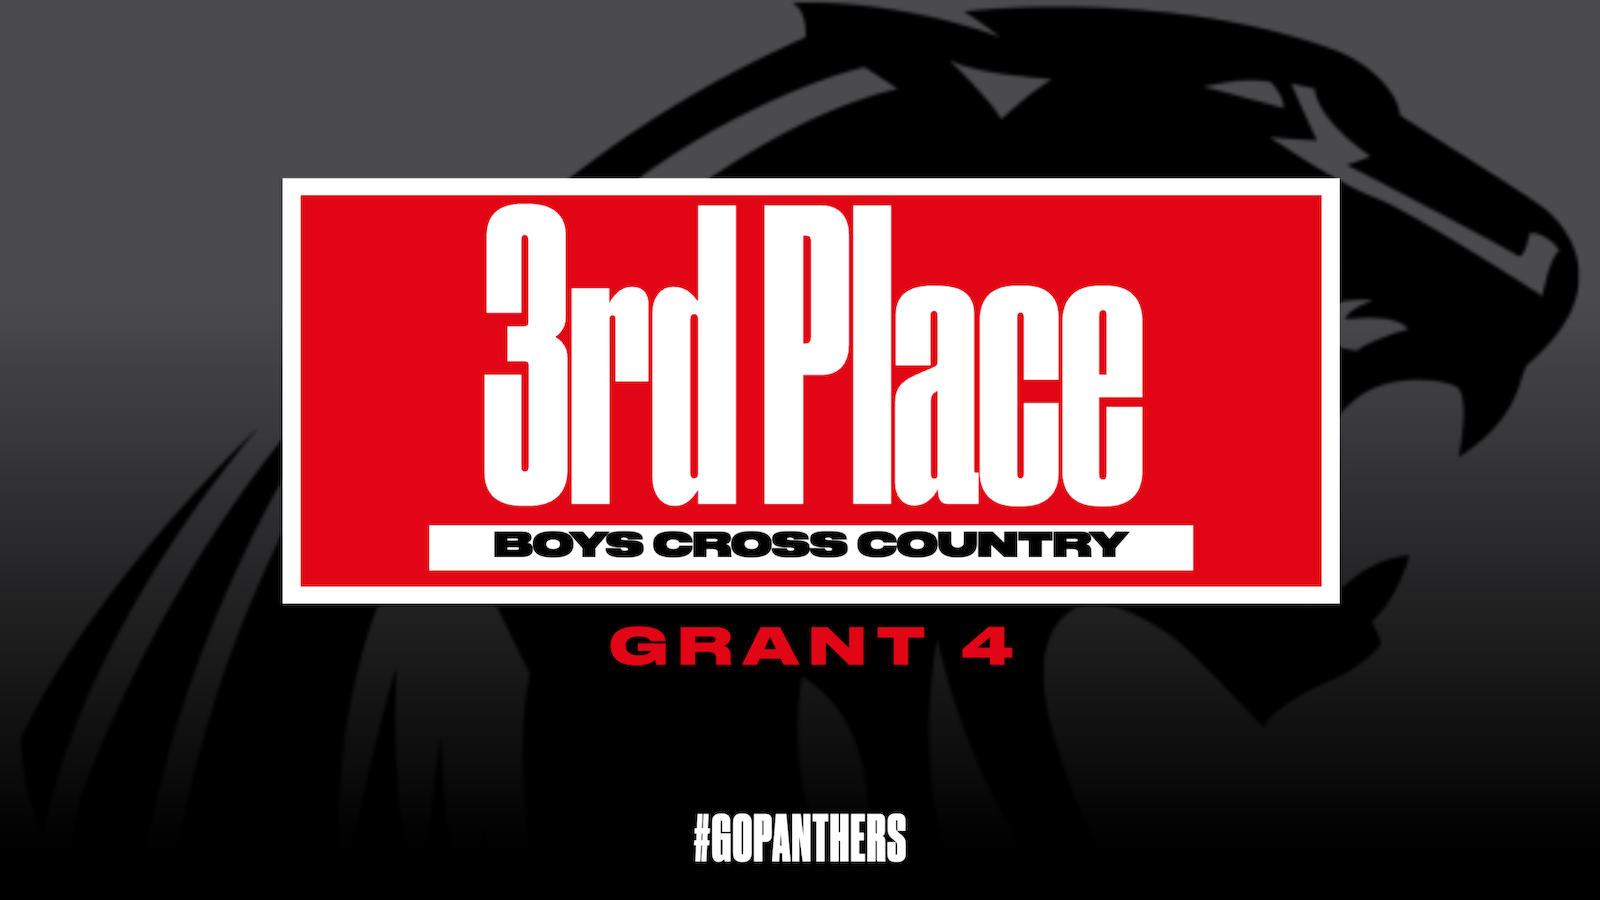 Boys cross country has strong finish at Grant 4 cover photo